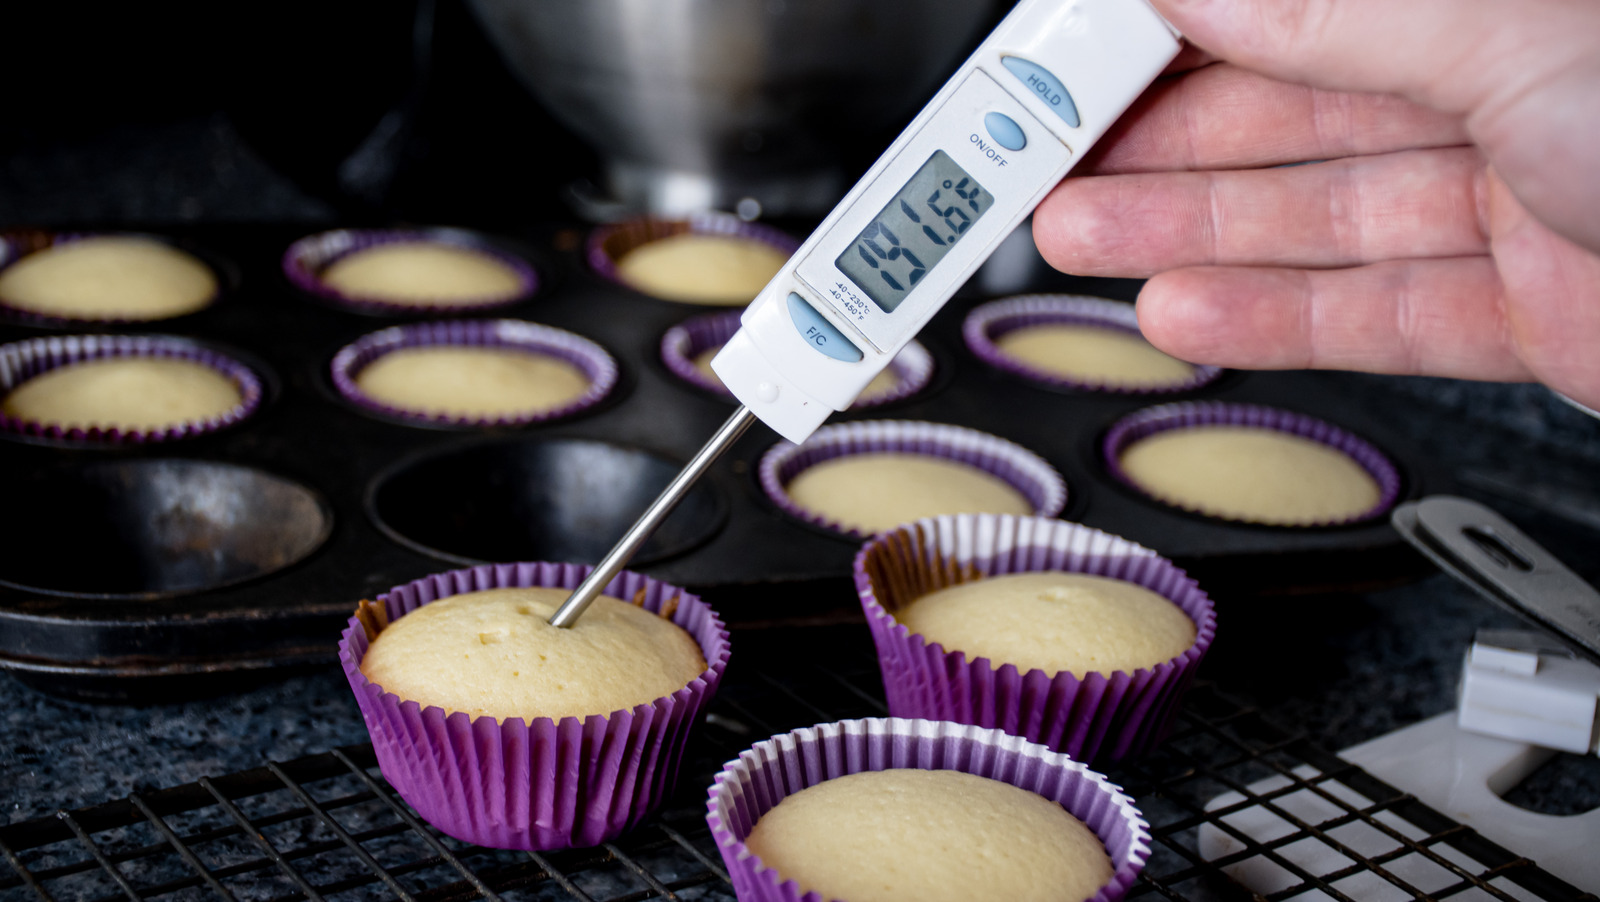 https://www.tastingtable.com/img/gallery/baking-is-even-easier-with-a-meat-thermometer-on-hand/l-intro-1700592755.jpg